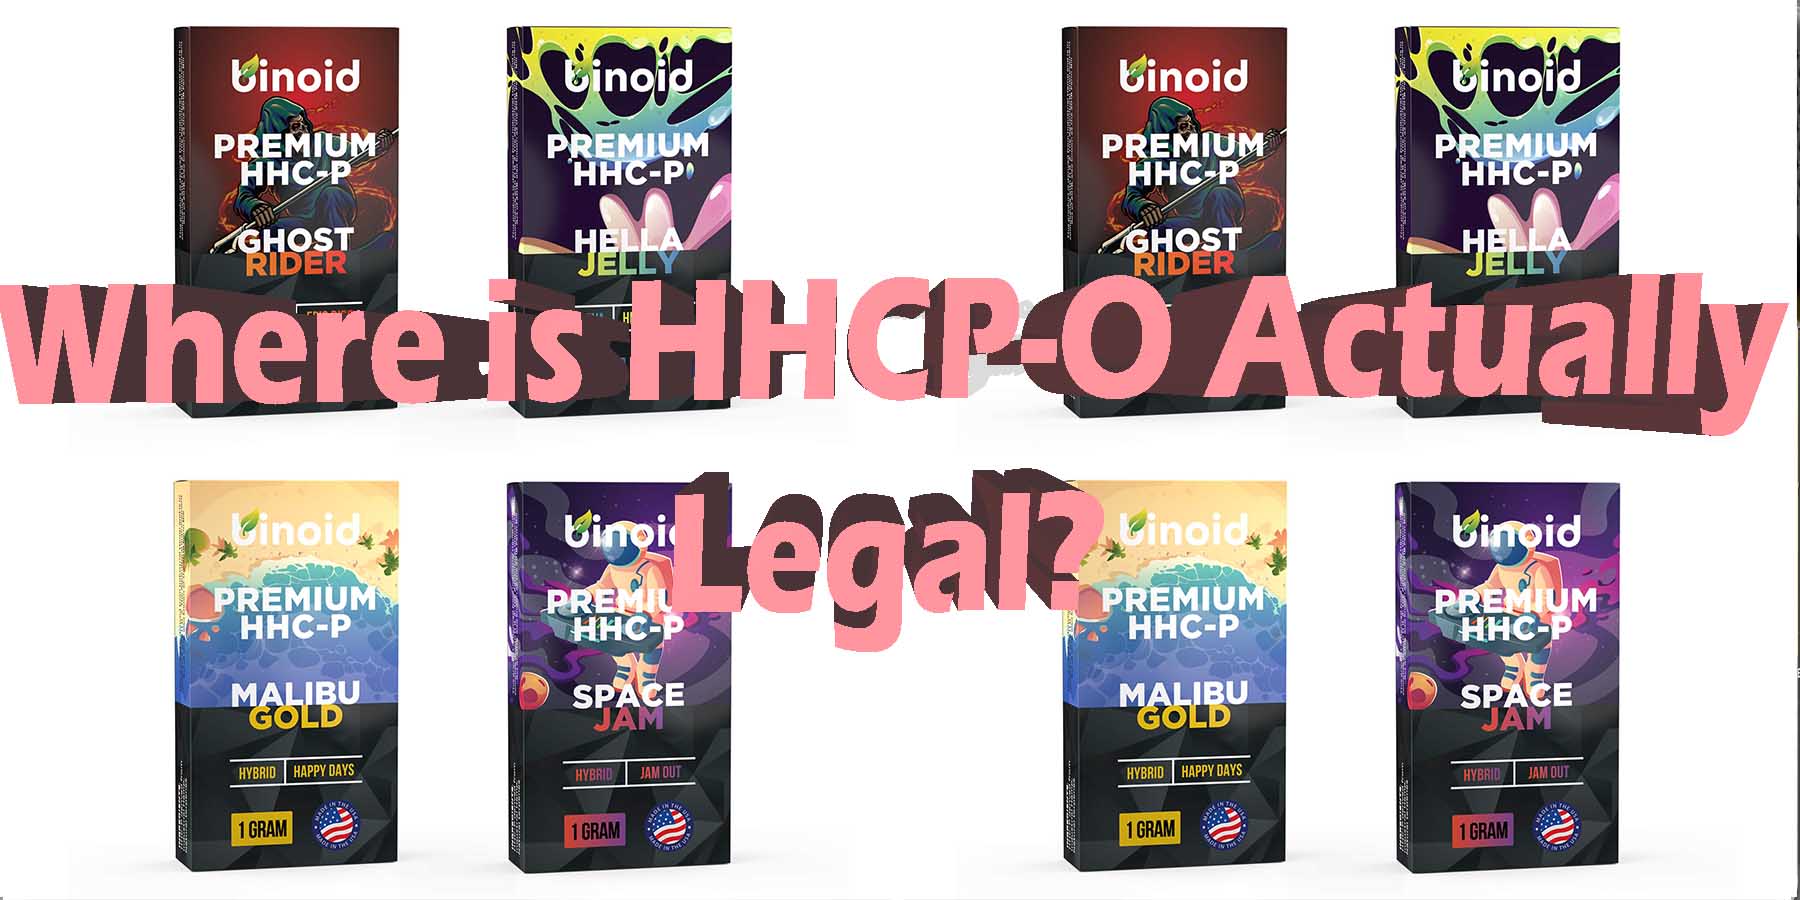 Where is HHCP-O Actually Legal HHCP O LowestPrice Coupon Discount For Smoking Best High Smoke Shop Online Near Me StrongestBrand Binoid